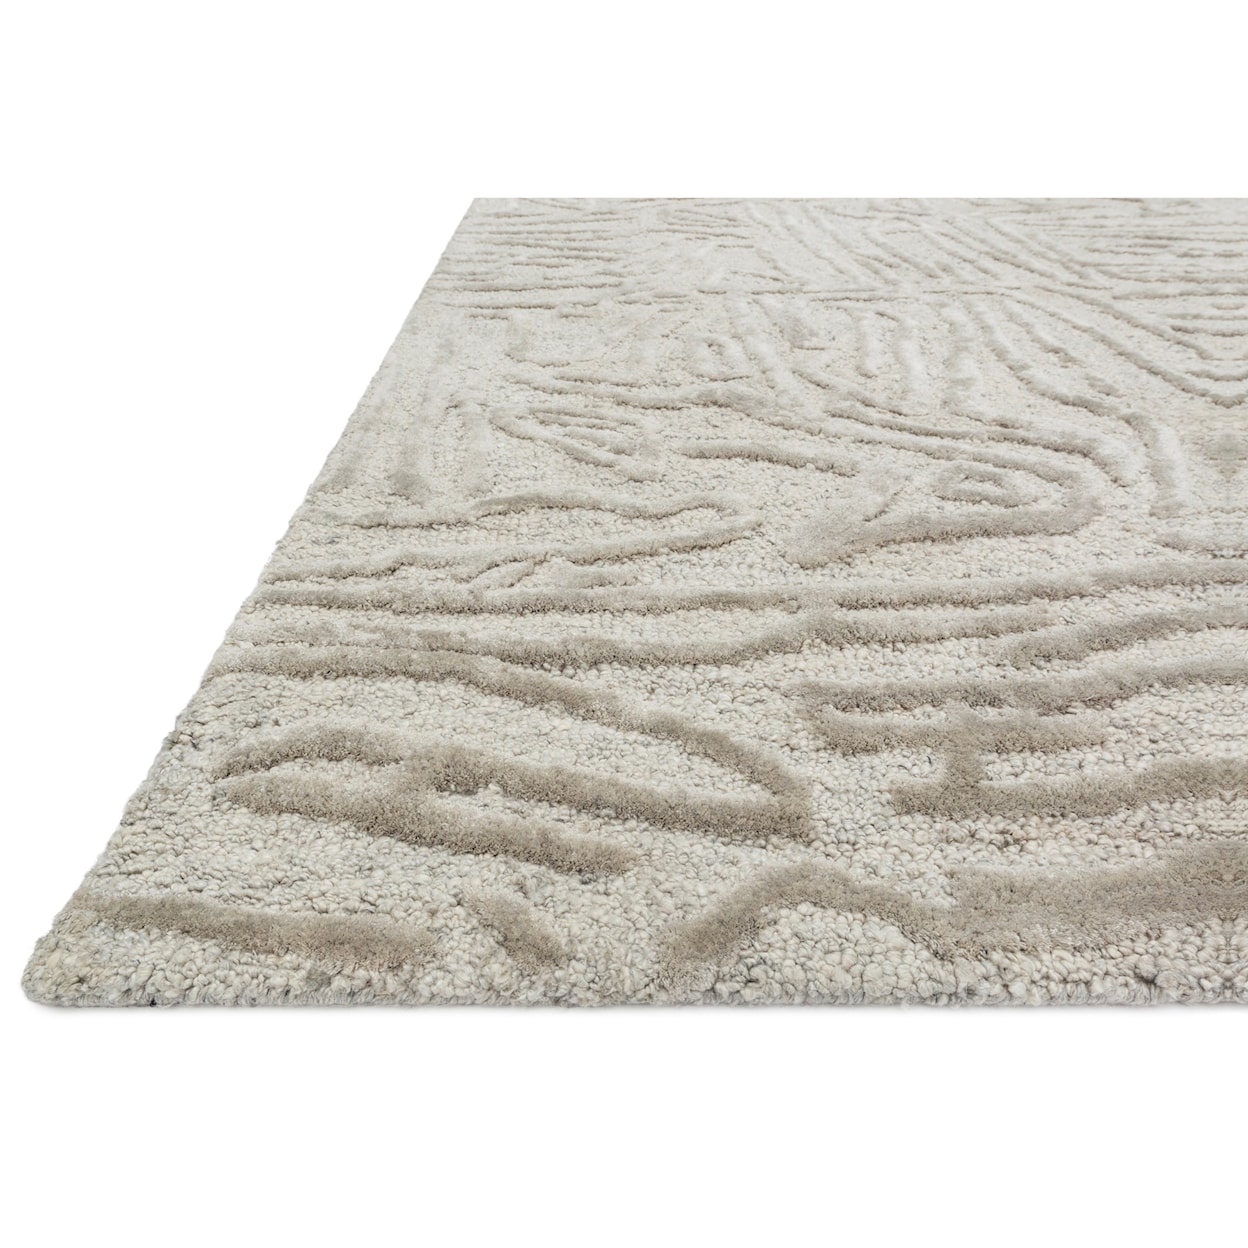 Reeds Rugs Juneau 1'6" x 1'6"  Silver / Silver Rug